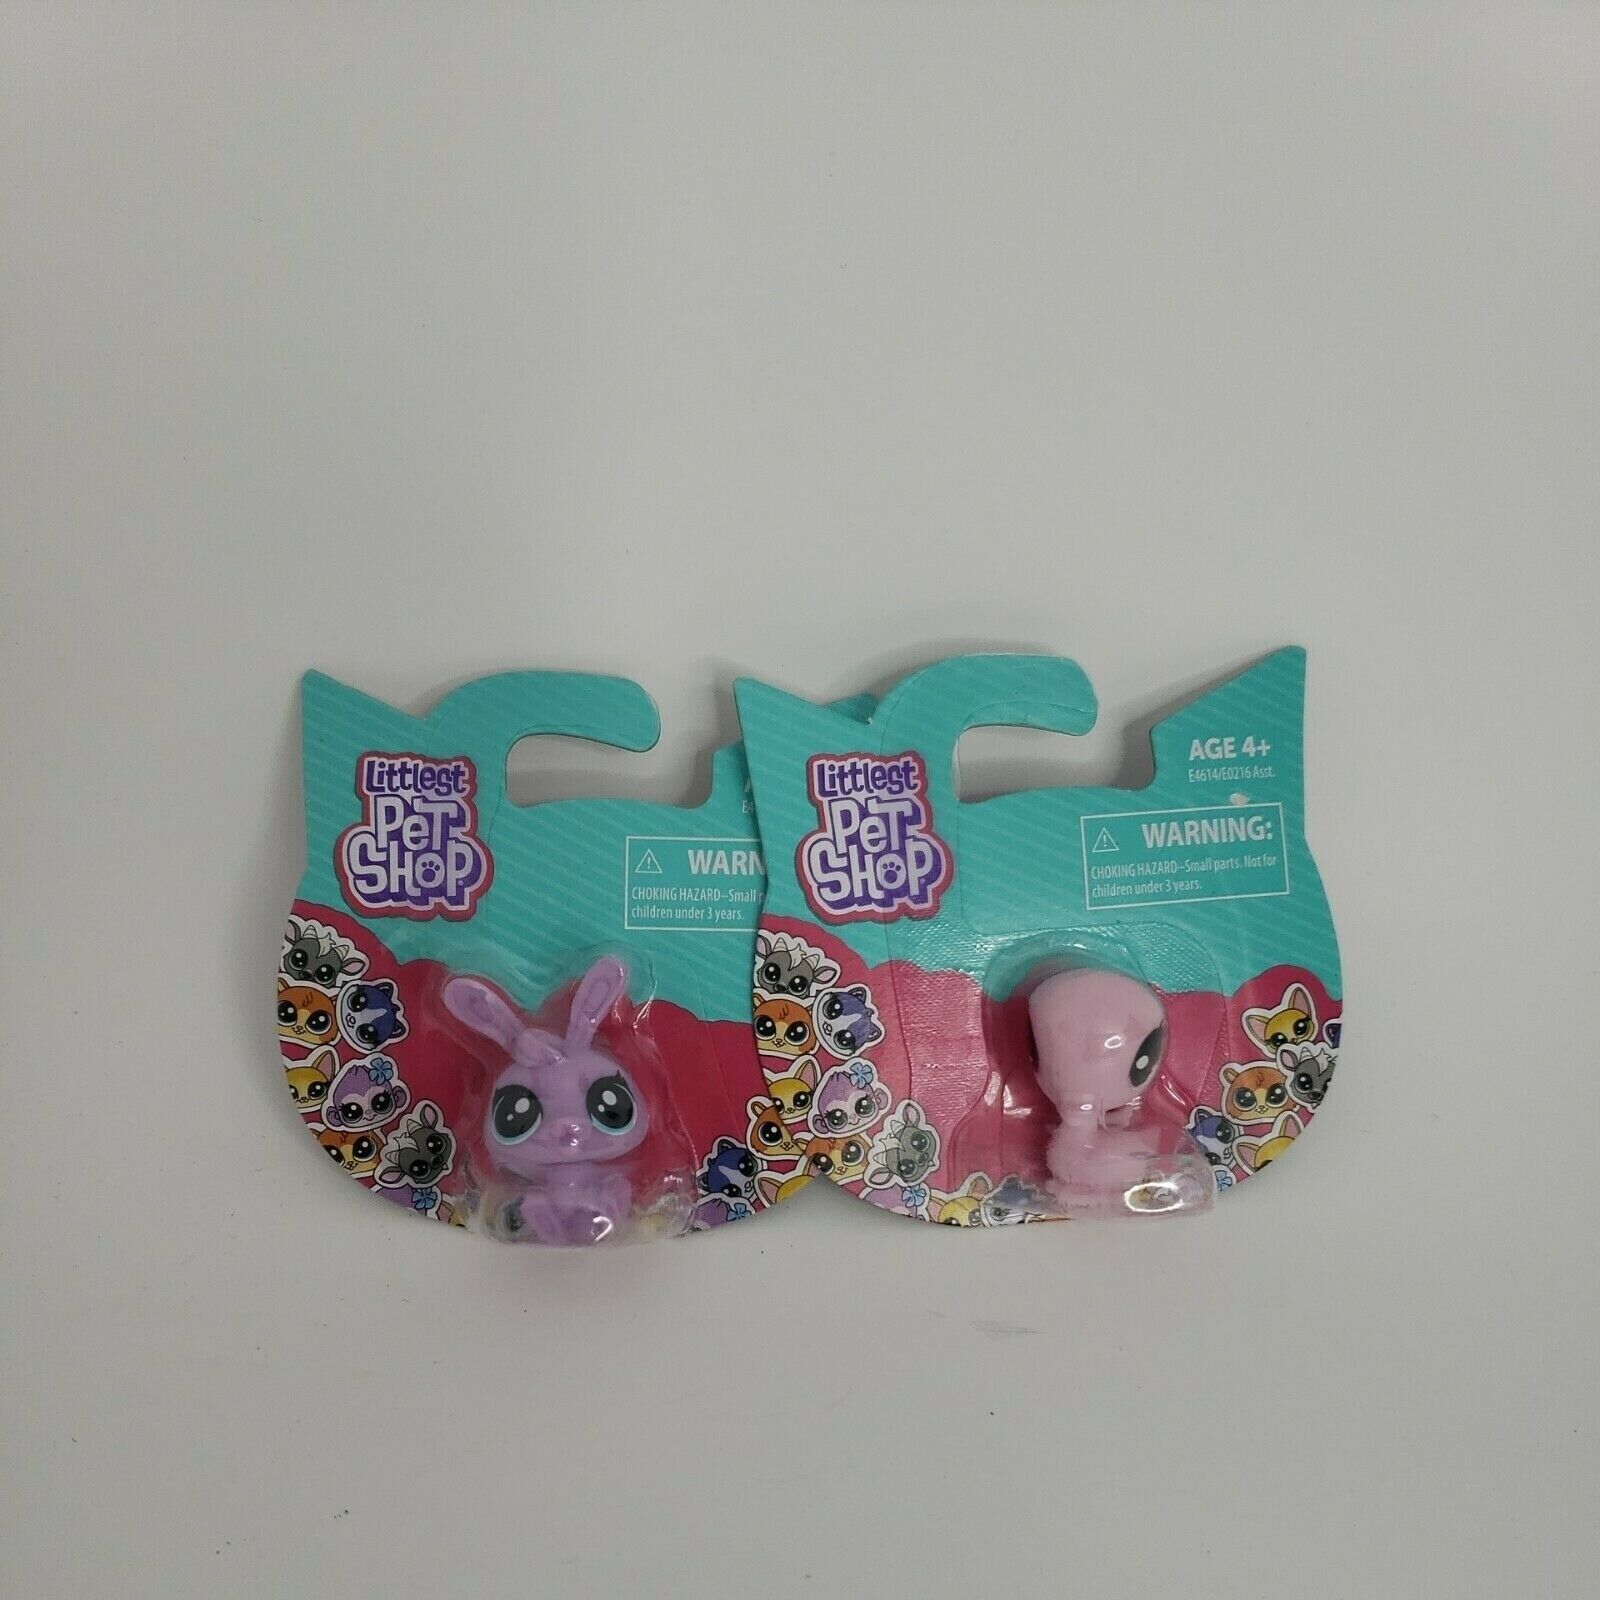 Littlest Pet Shop Swan and Bunny Figurine, by Hasbro 2018, New in Box - $15.83